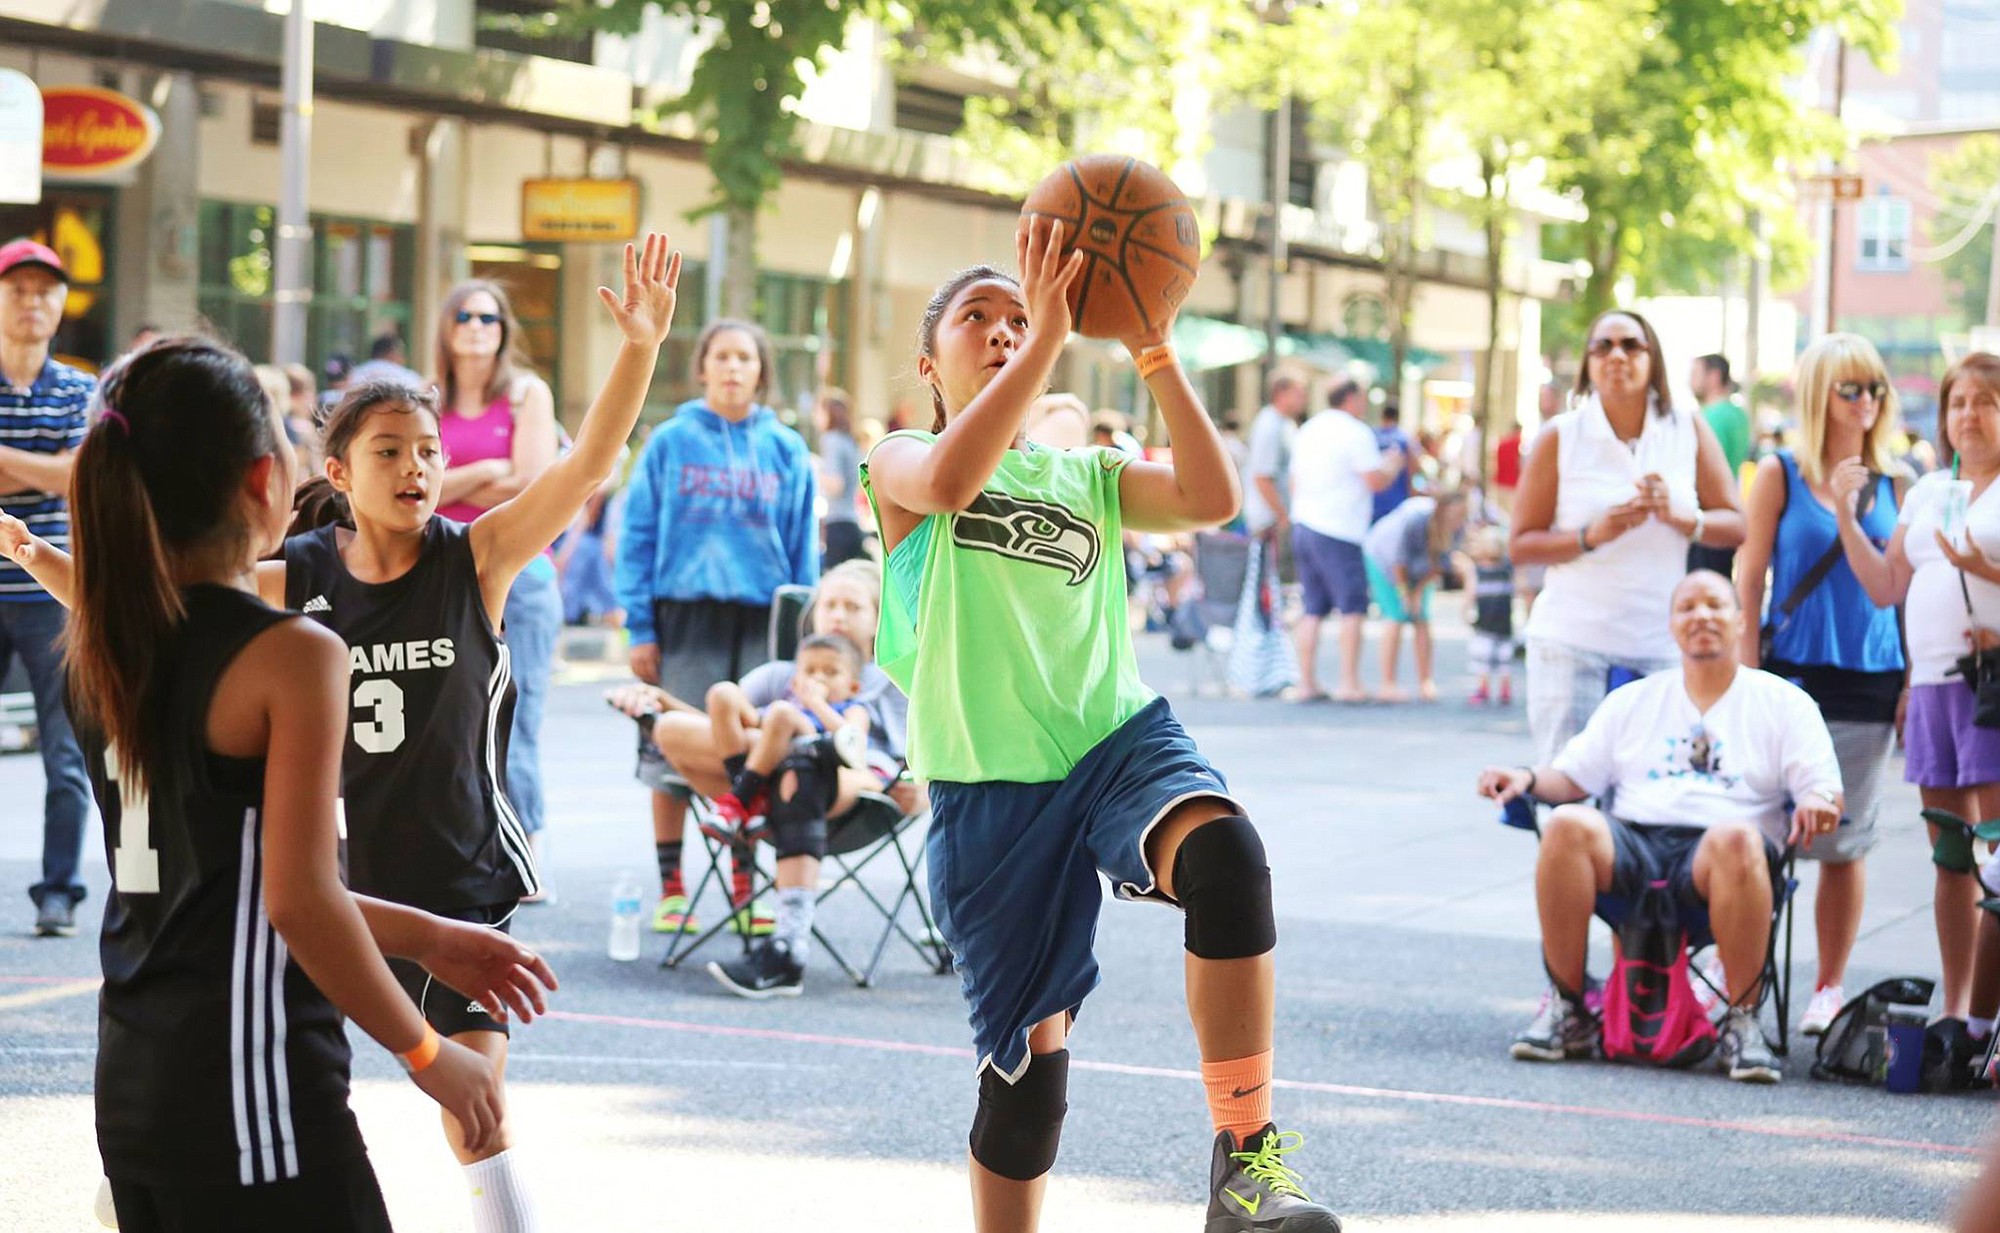 Younger basketball players are welcome to participate in Hoops on the River, too.